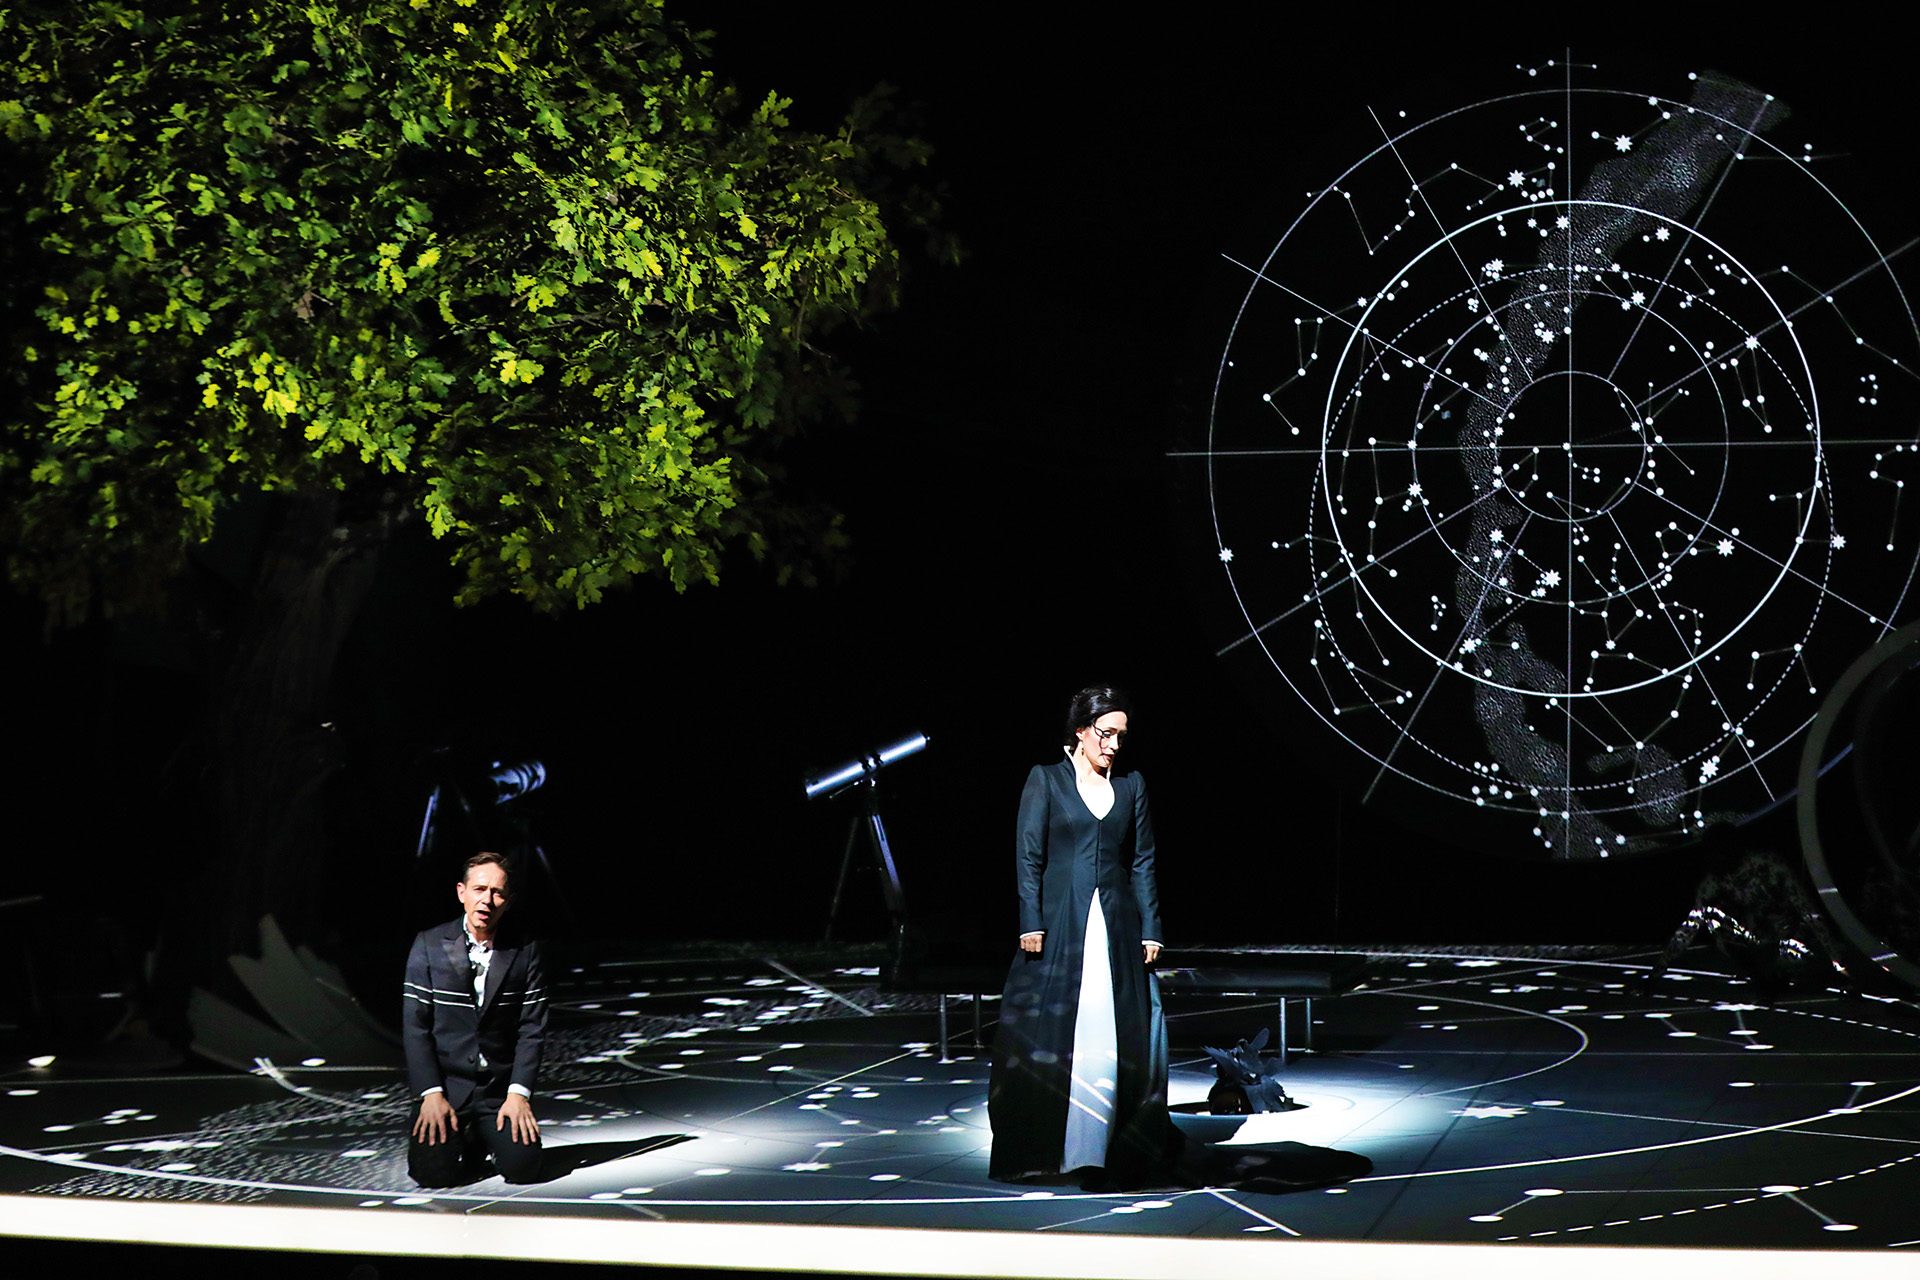 A woman in a black and white dress stands in the centre of a dark, sparse stage, while a man kneels underneath a vivd green tree. Both are surrounded by constellations.